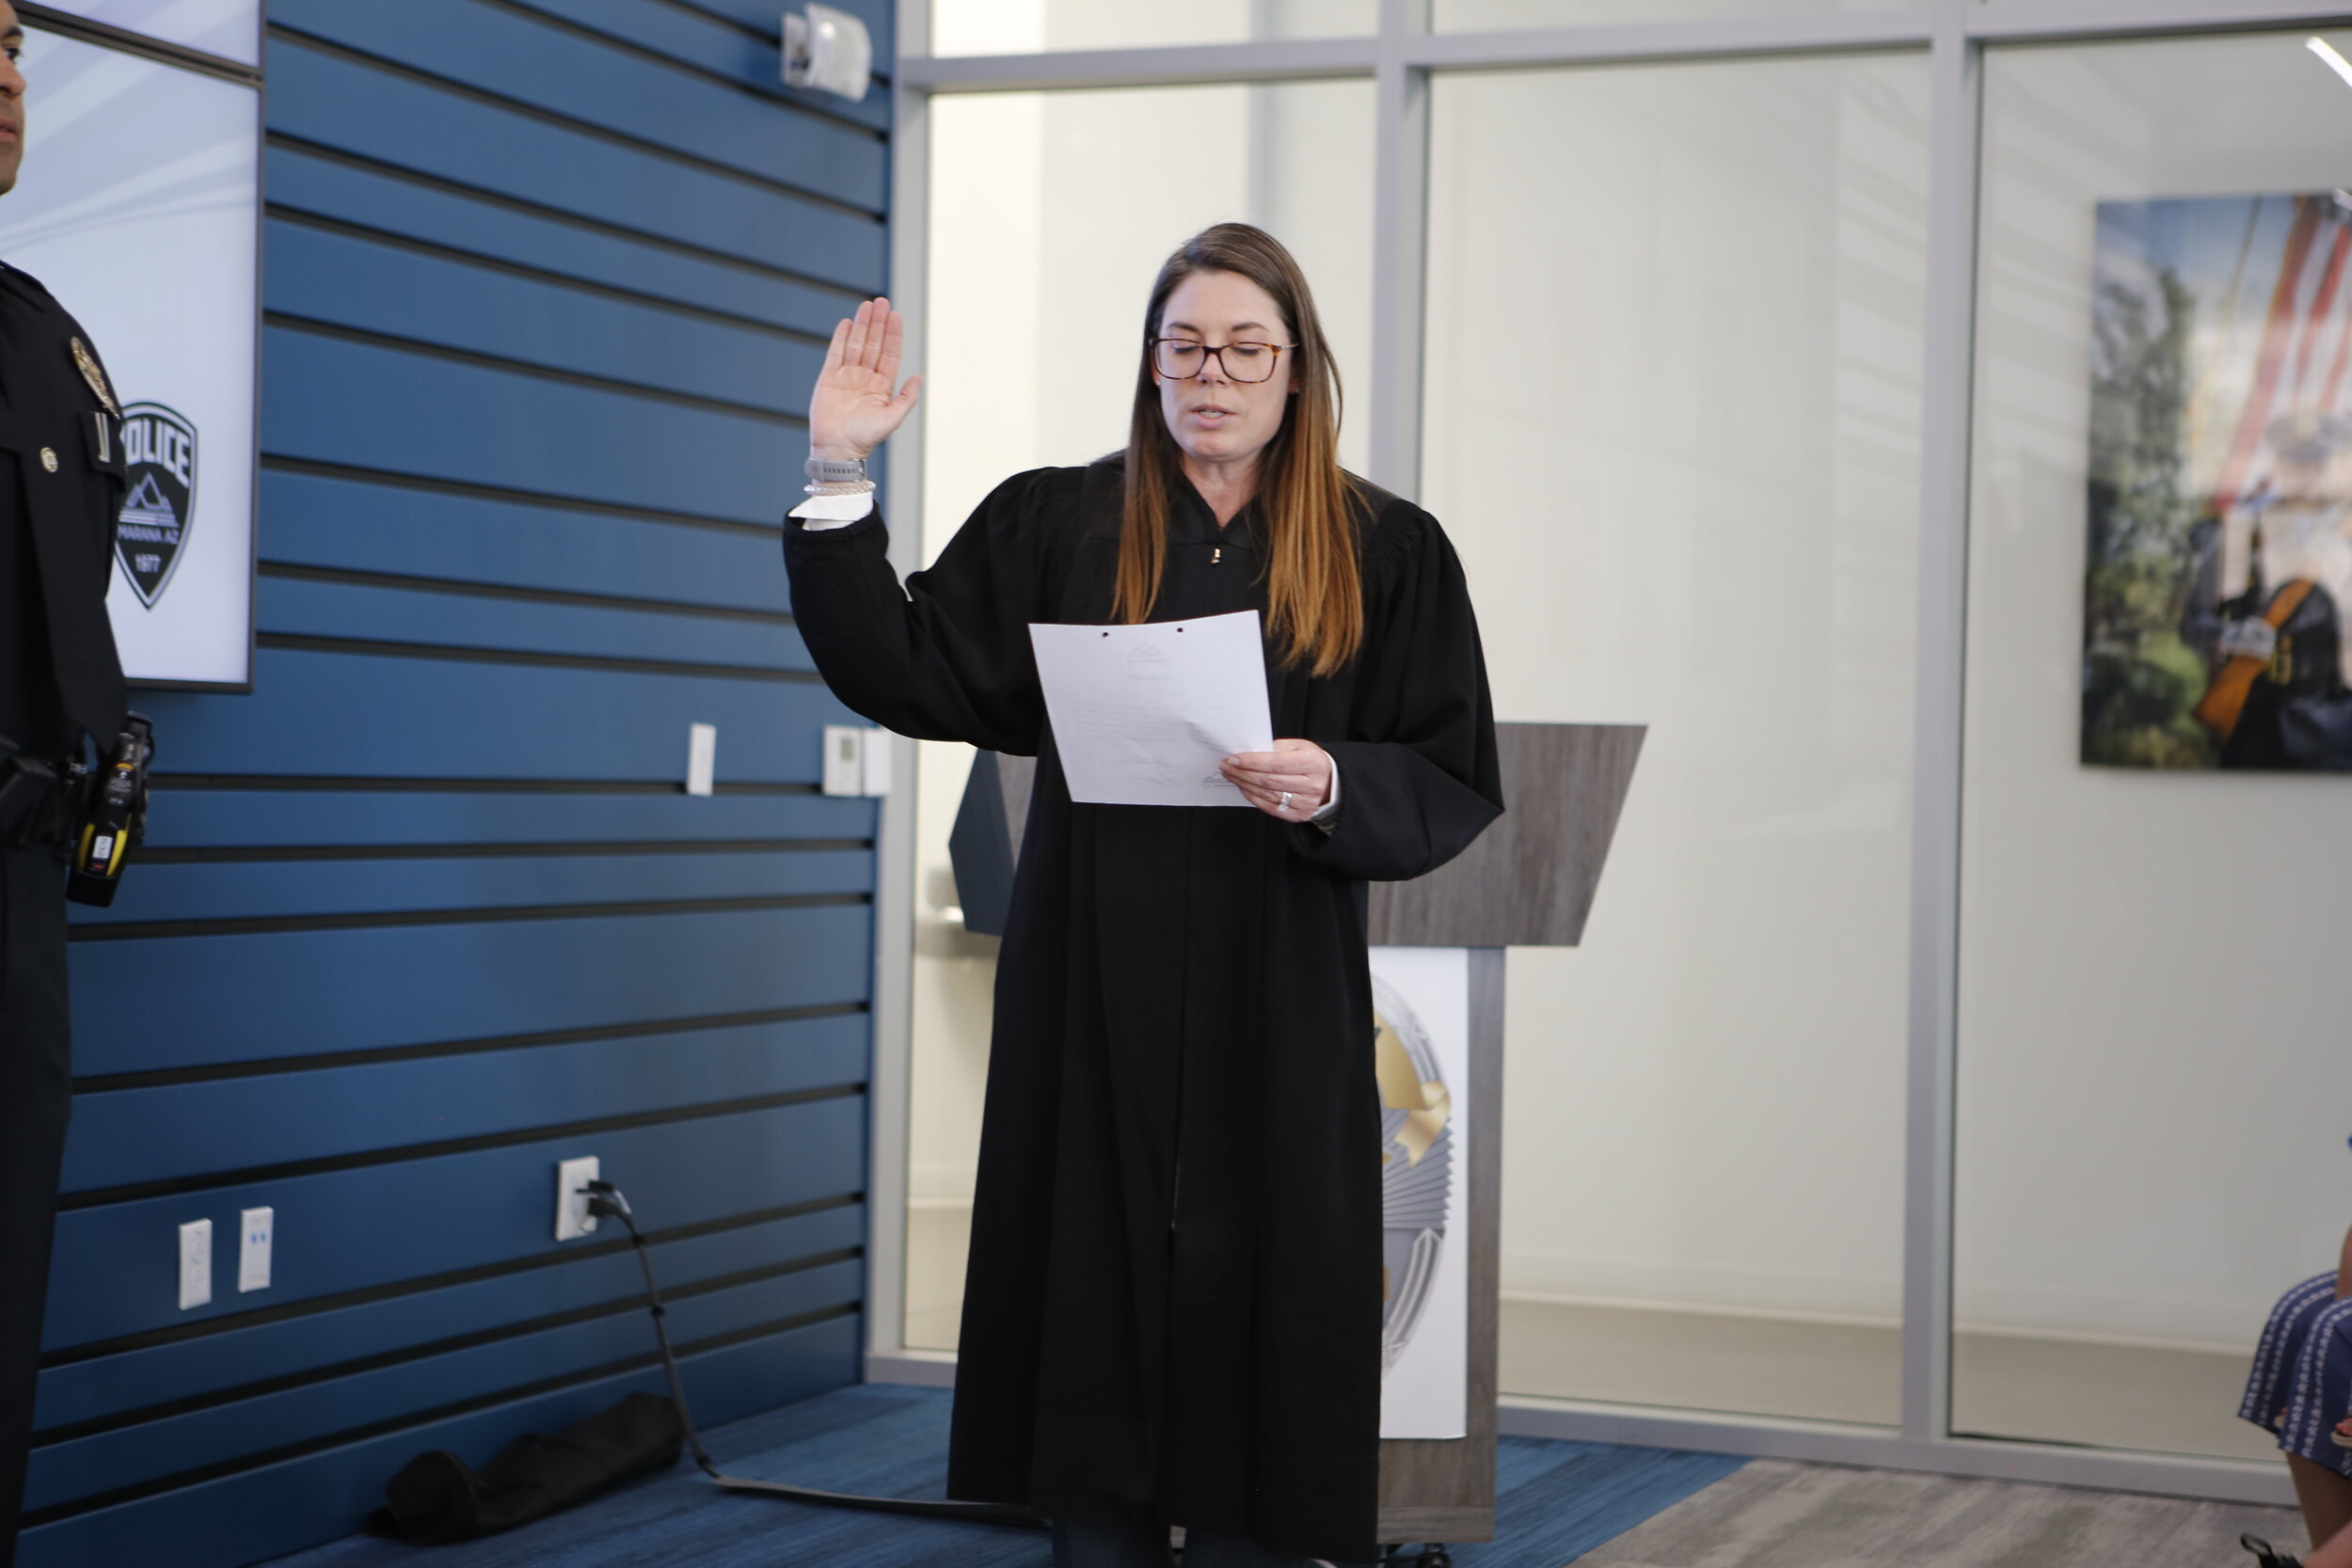  Honorable Judge McDonald administered the Oath of Office 